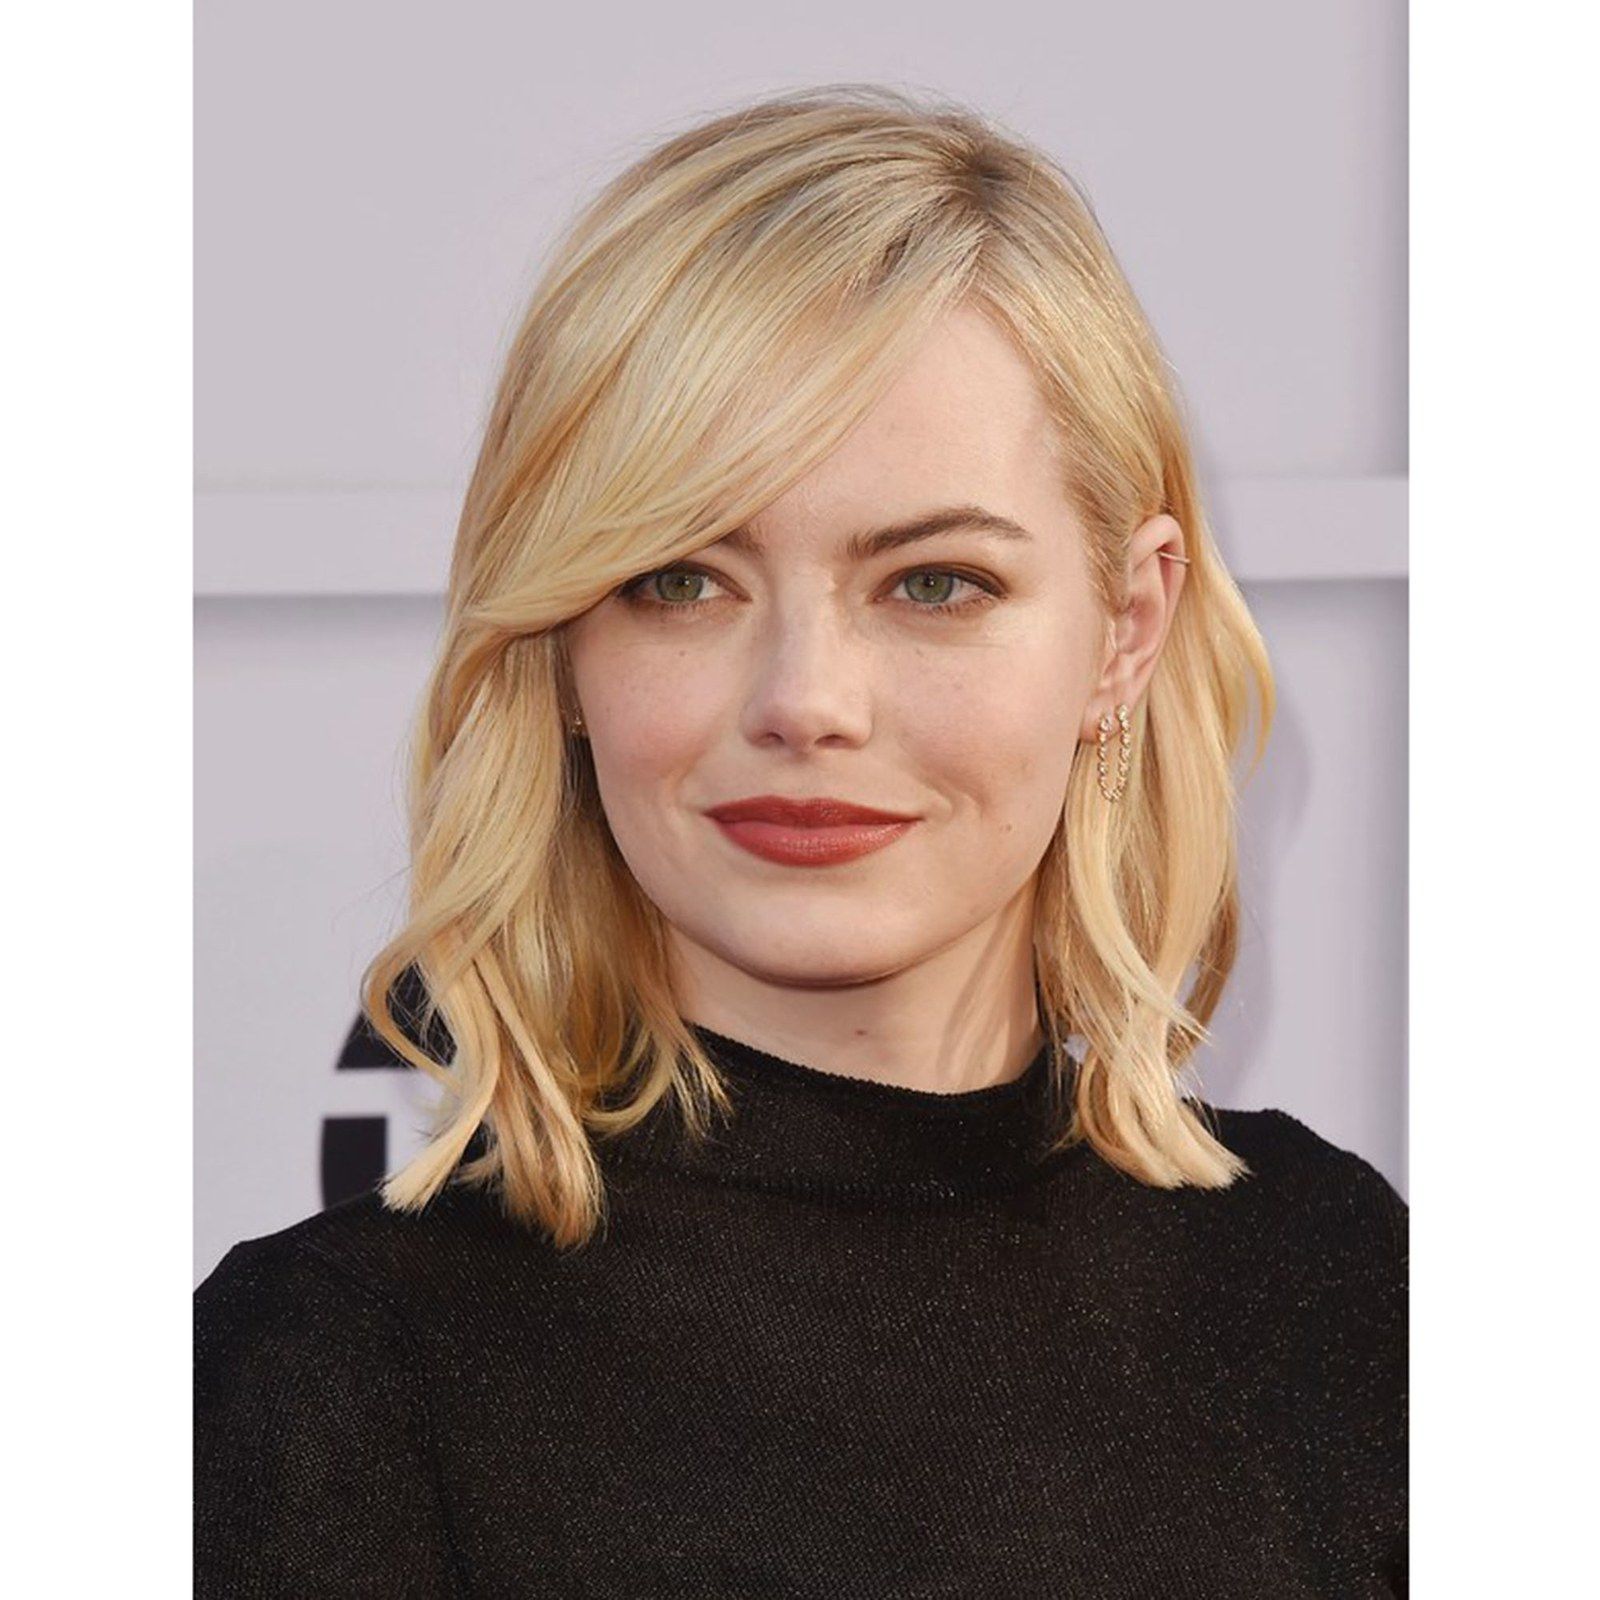 The 9 Best Haircuts For Round Faces, According To Stylists – Allure With Short Hairstyles With Bangs And Layers For Round Faces (View 17 of 25)